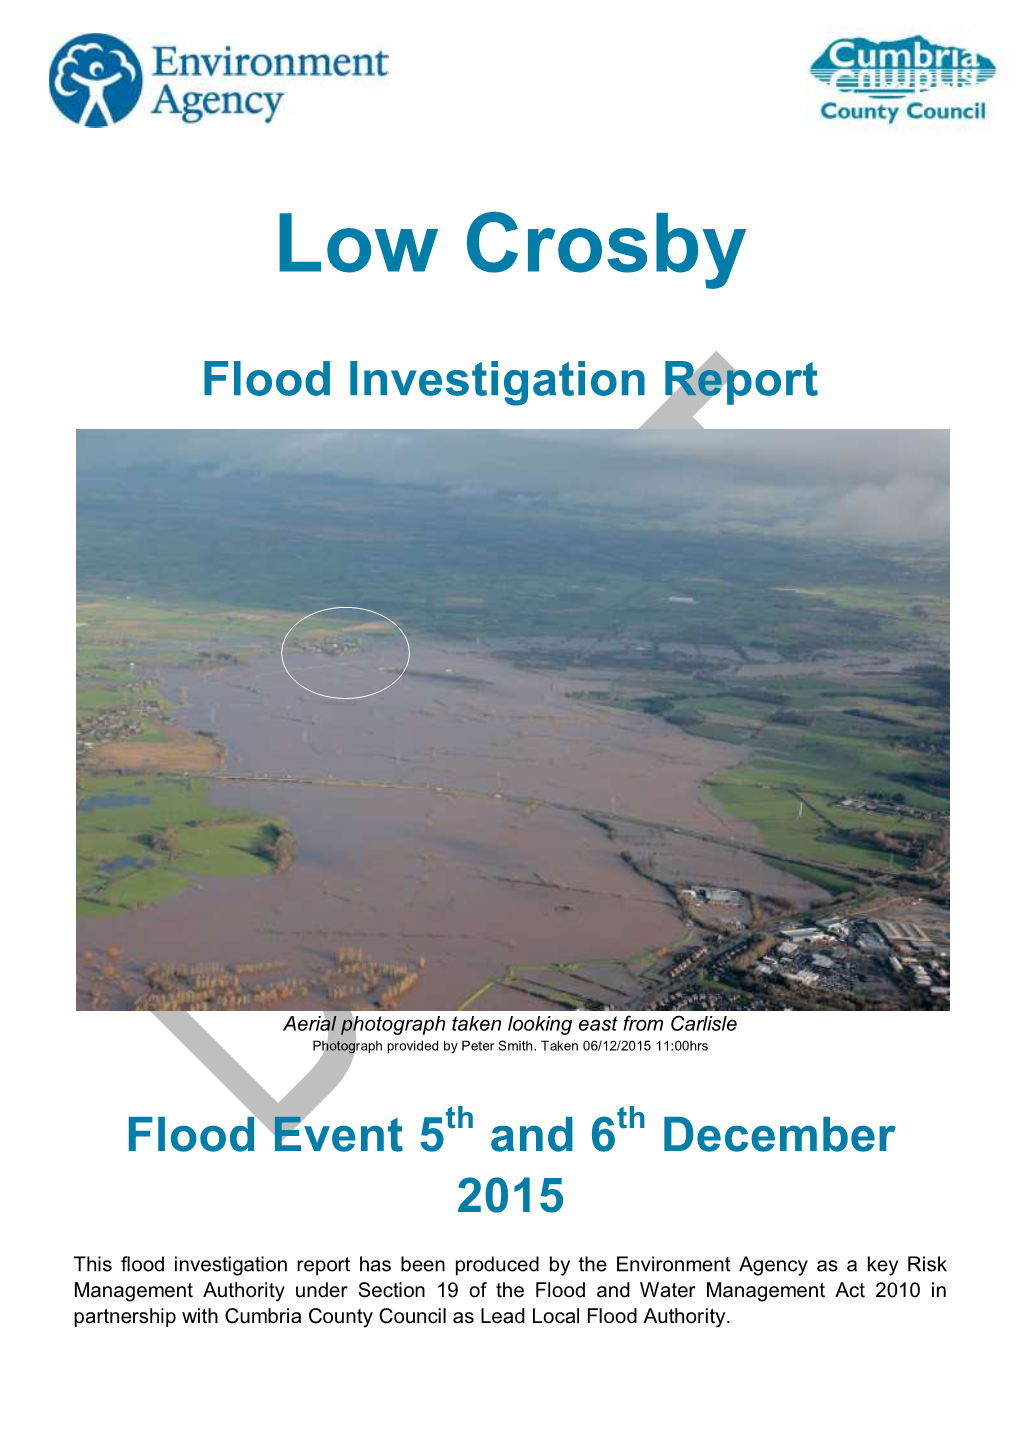 Low Crosby Floof Investiagtion Report